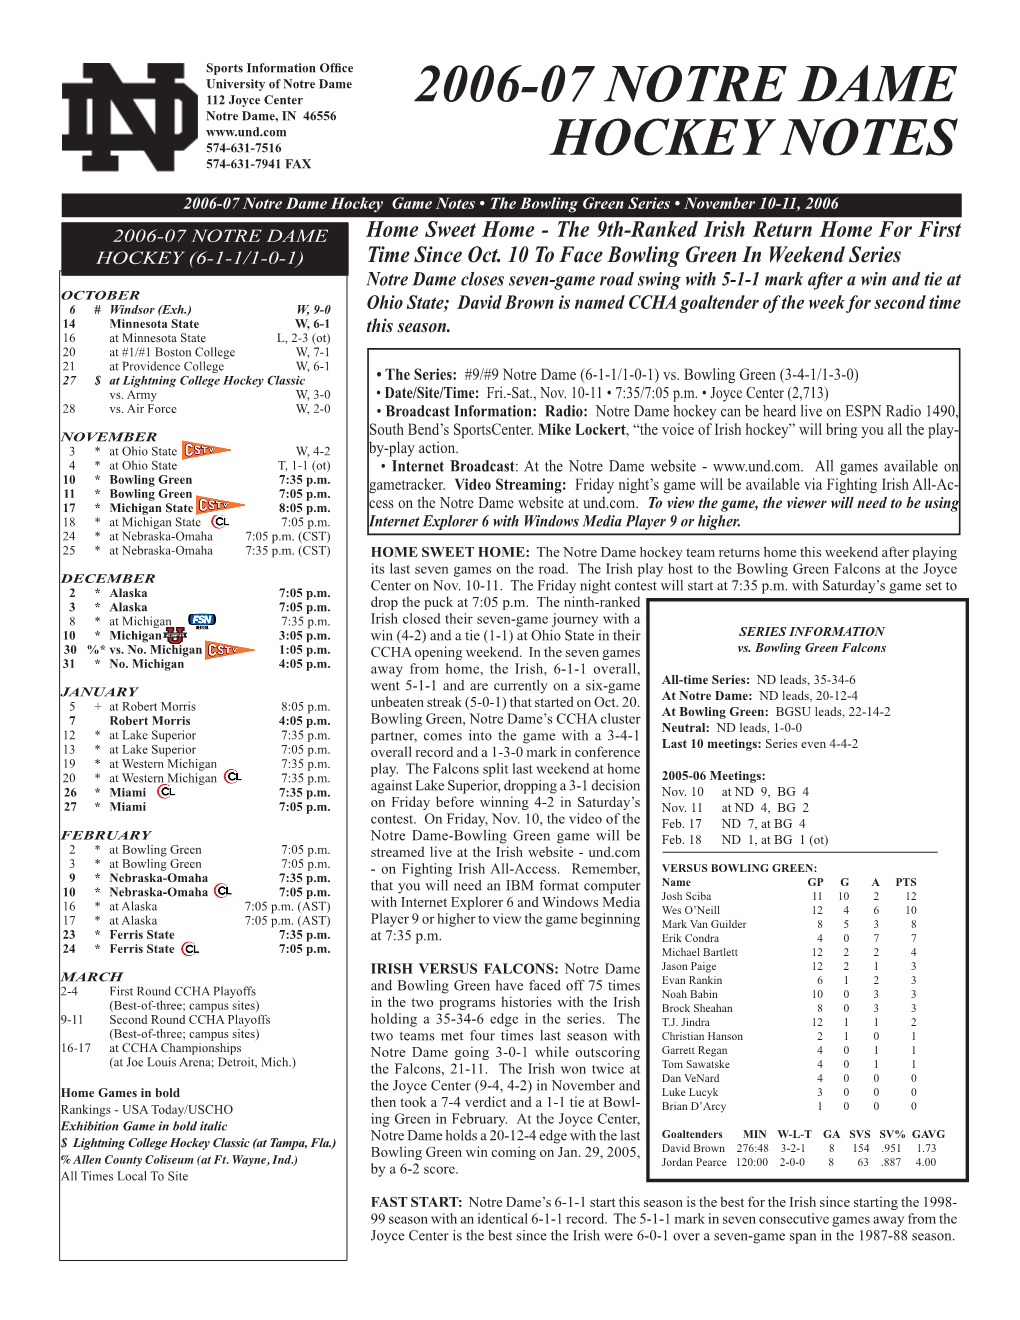 2006-07 Notre Dame Hockey Notes